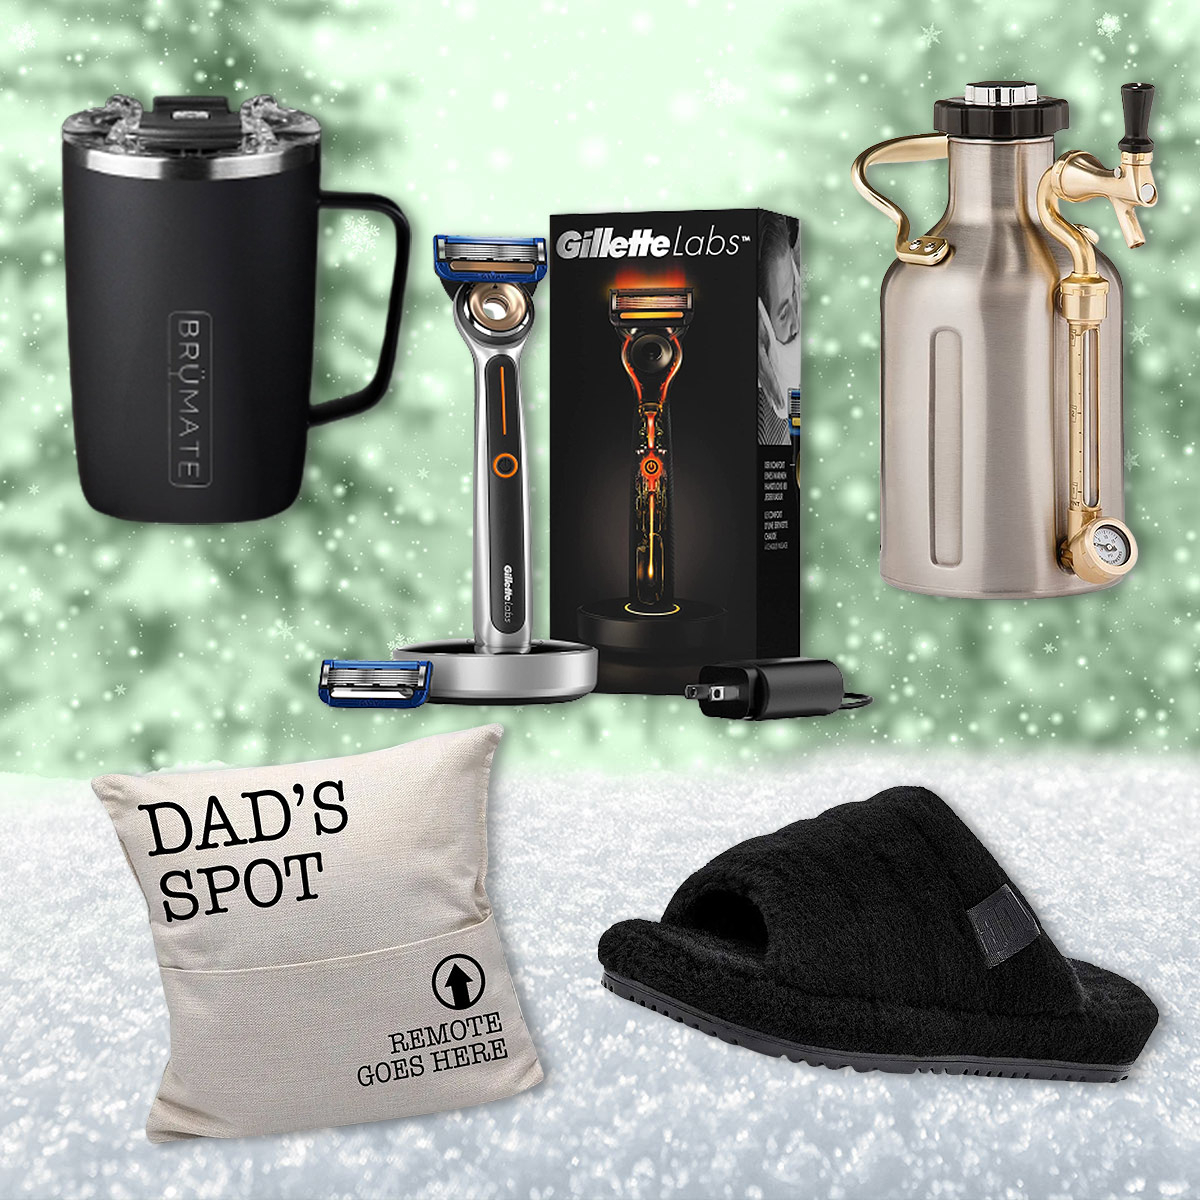 15 Useful Gifts for Dad for under $50 - Joyful Derivatives